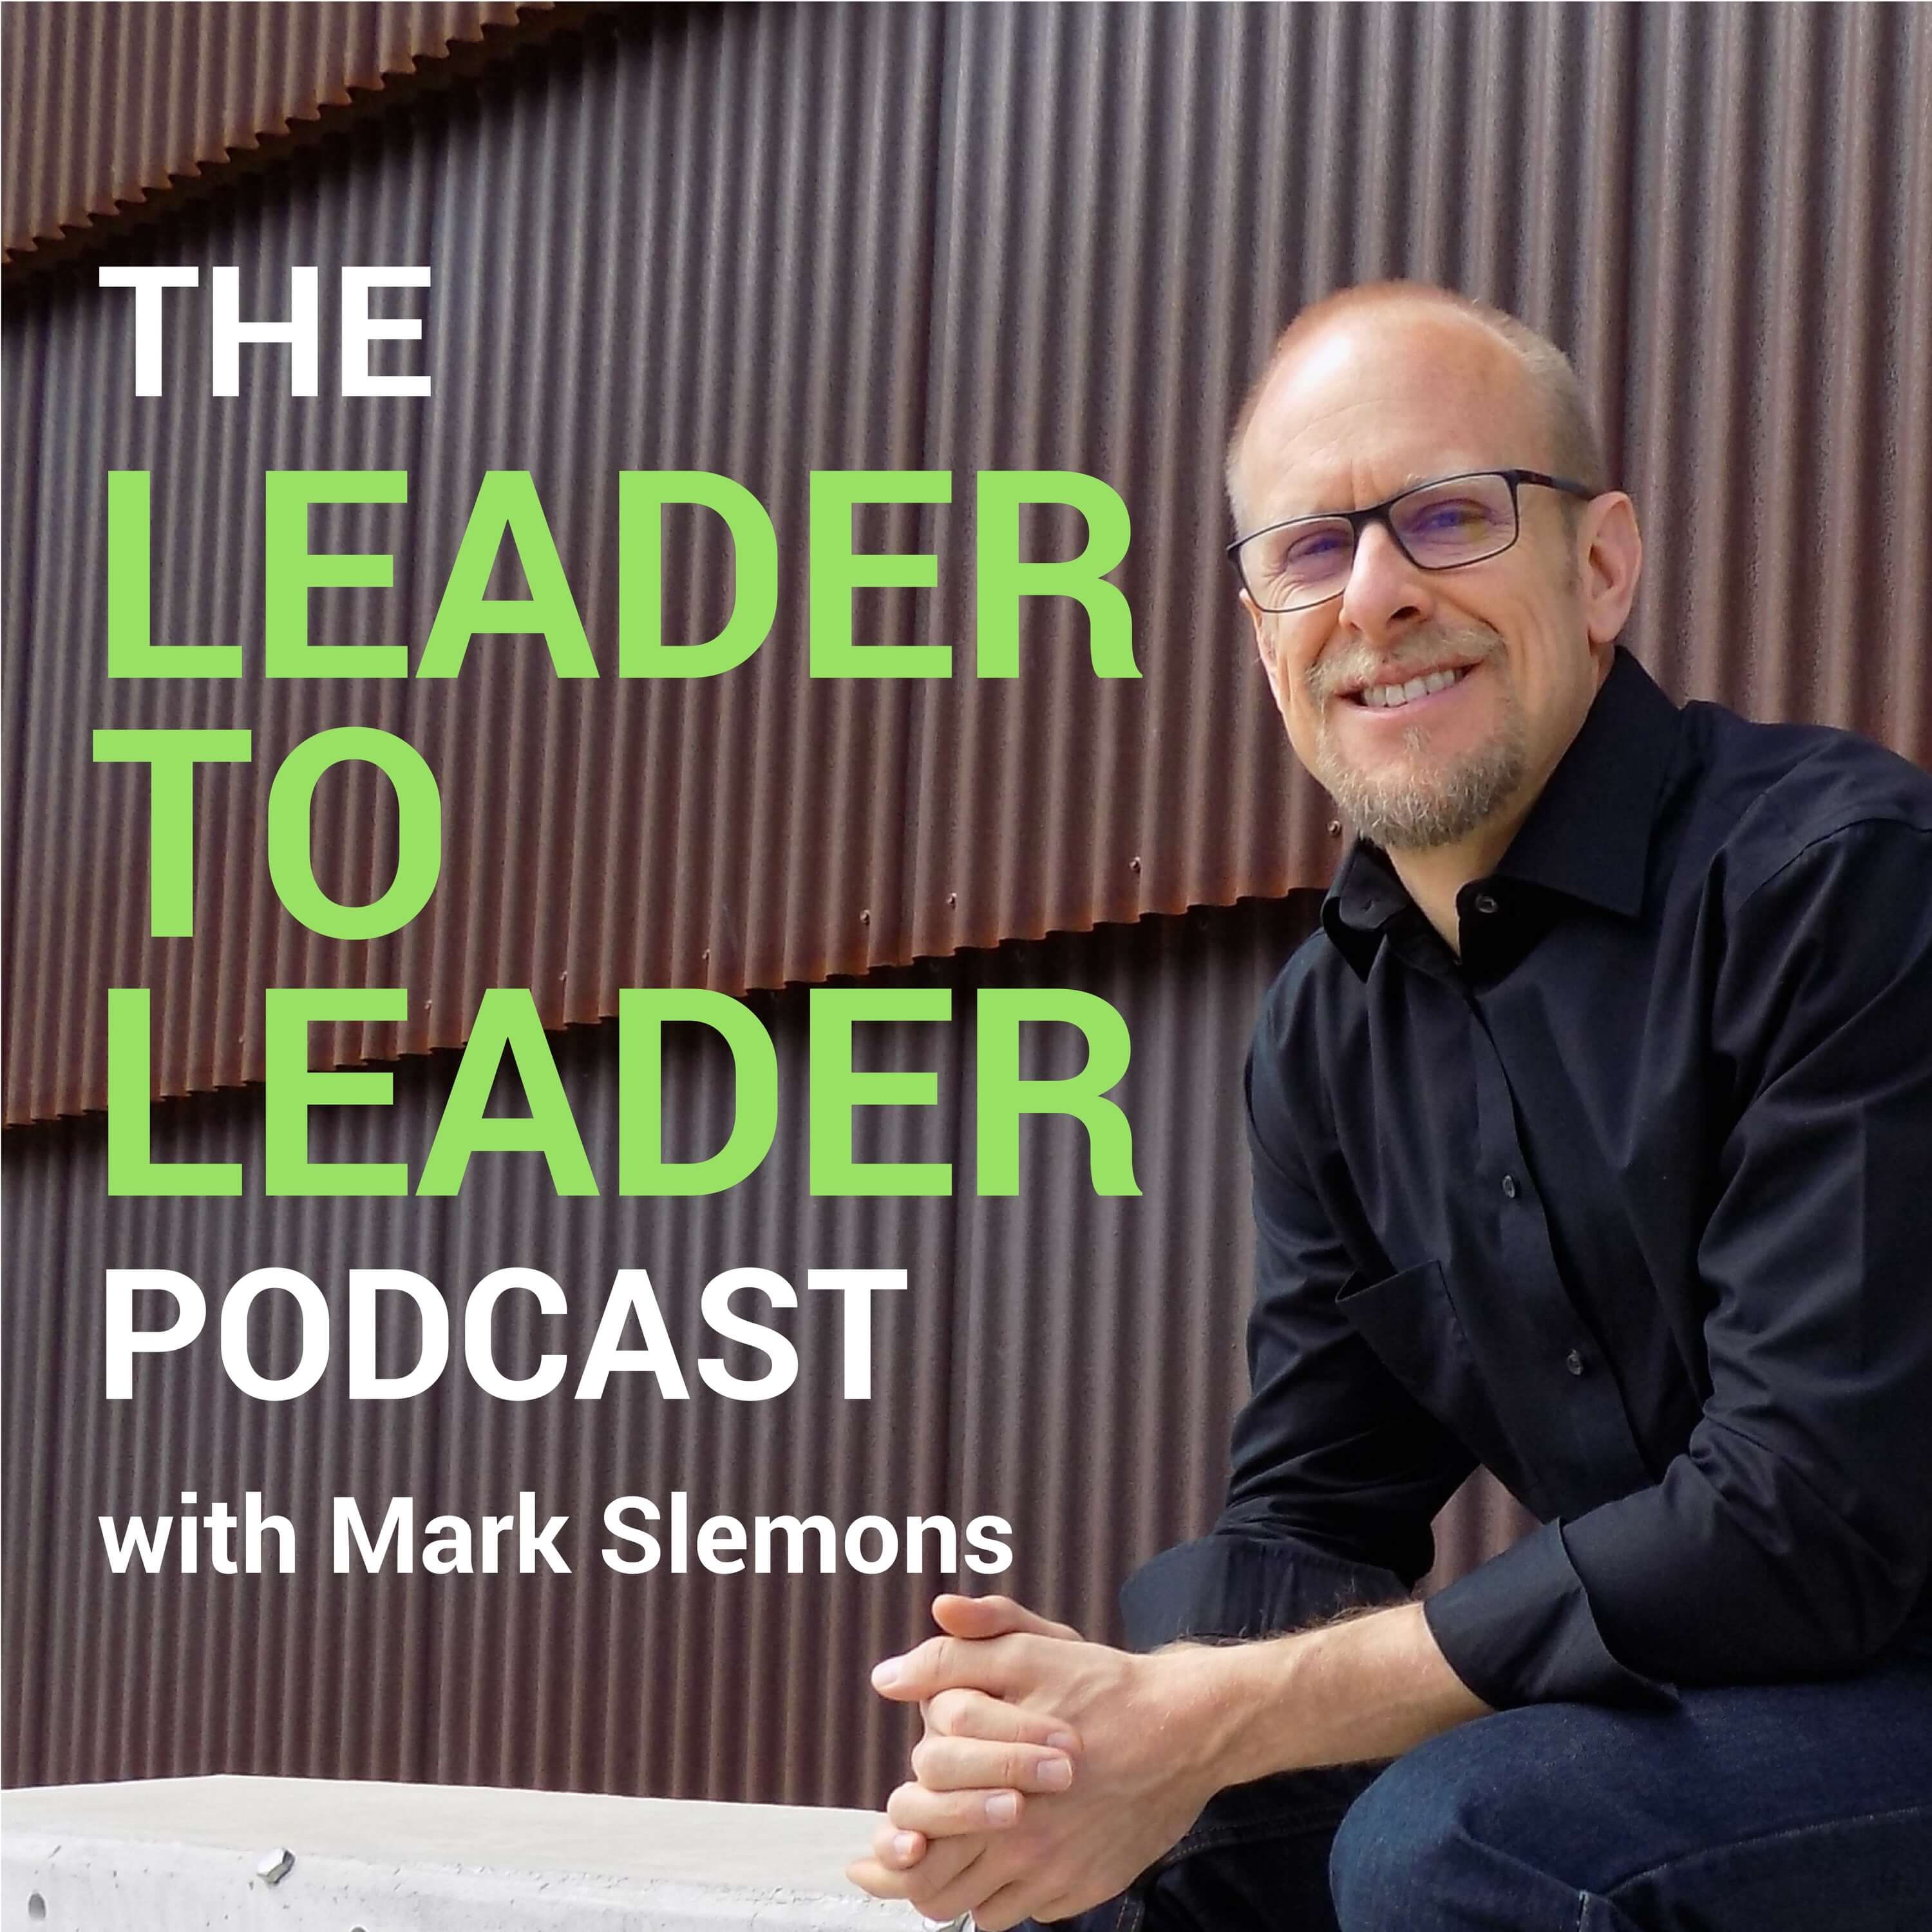 The Leader To Leader Podcast with Mark Slemons